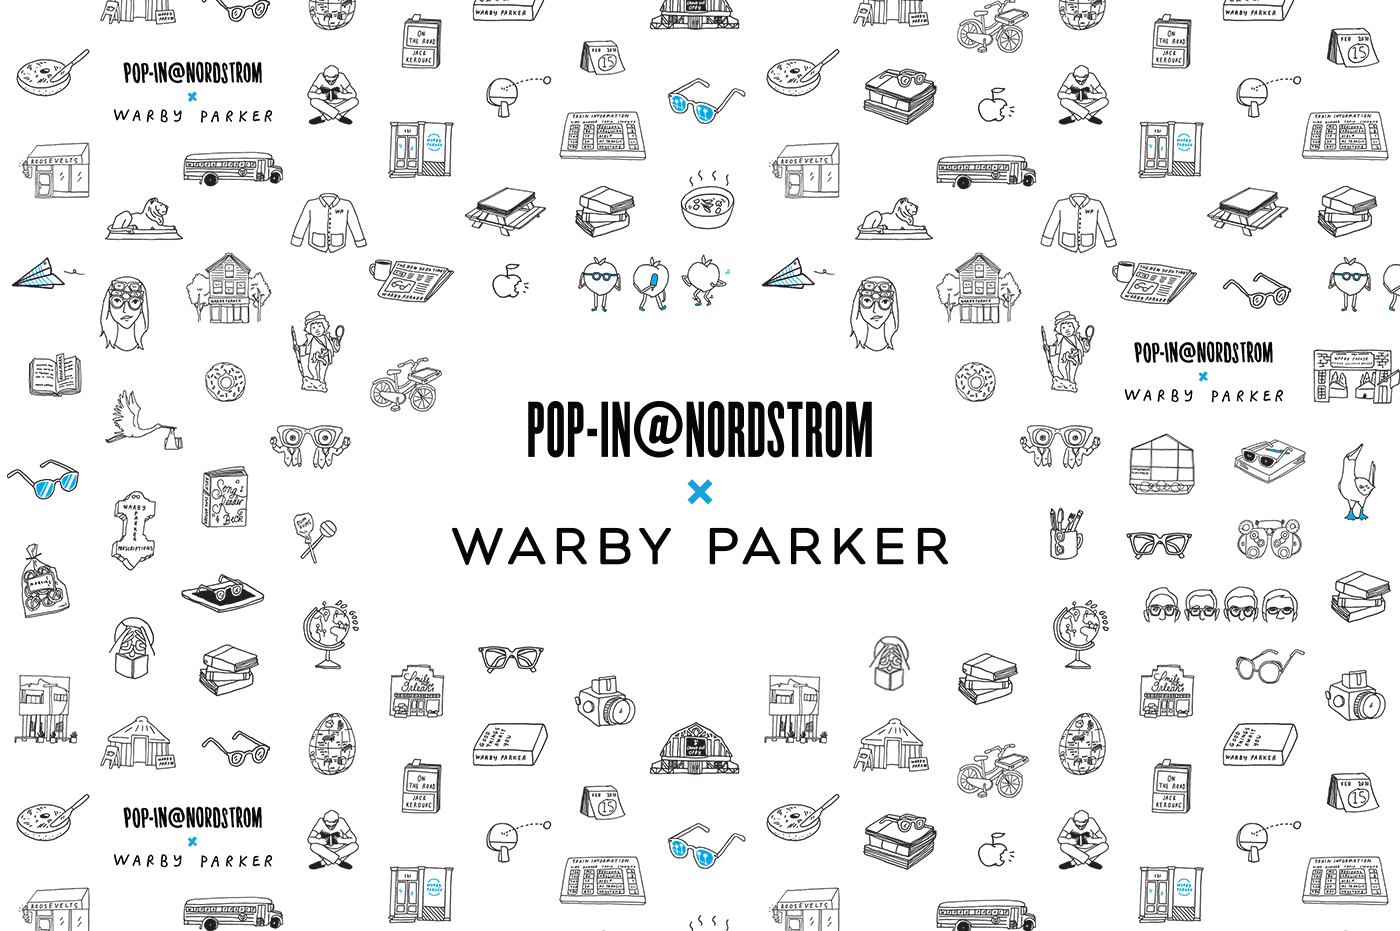 Introducing Pop-In@Nordstrom x Warby Parker